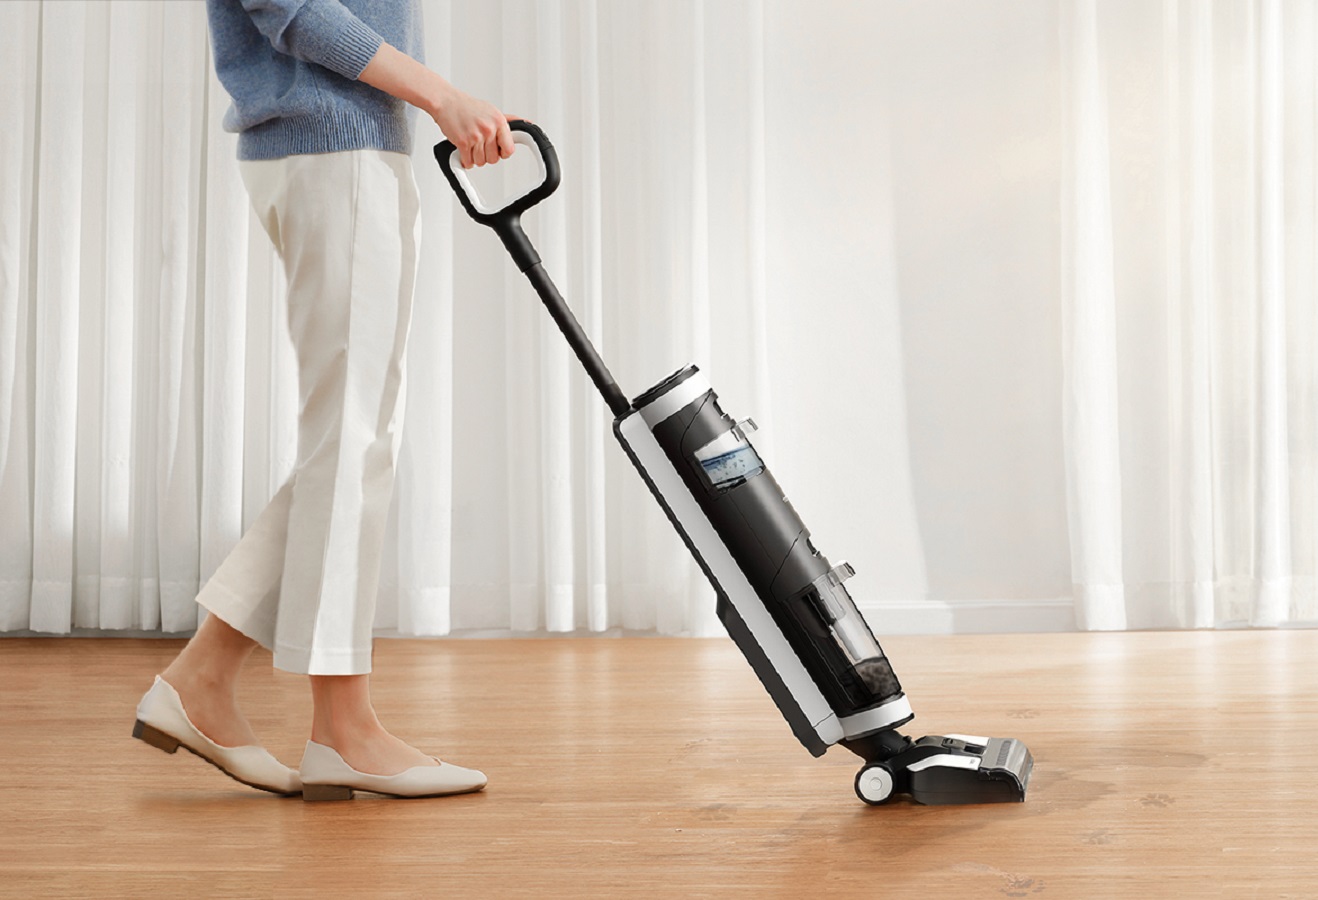 5 Best Cordless Vacuums for May 2022 | Check Reviews